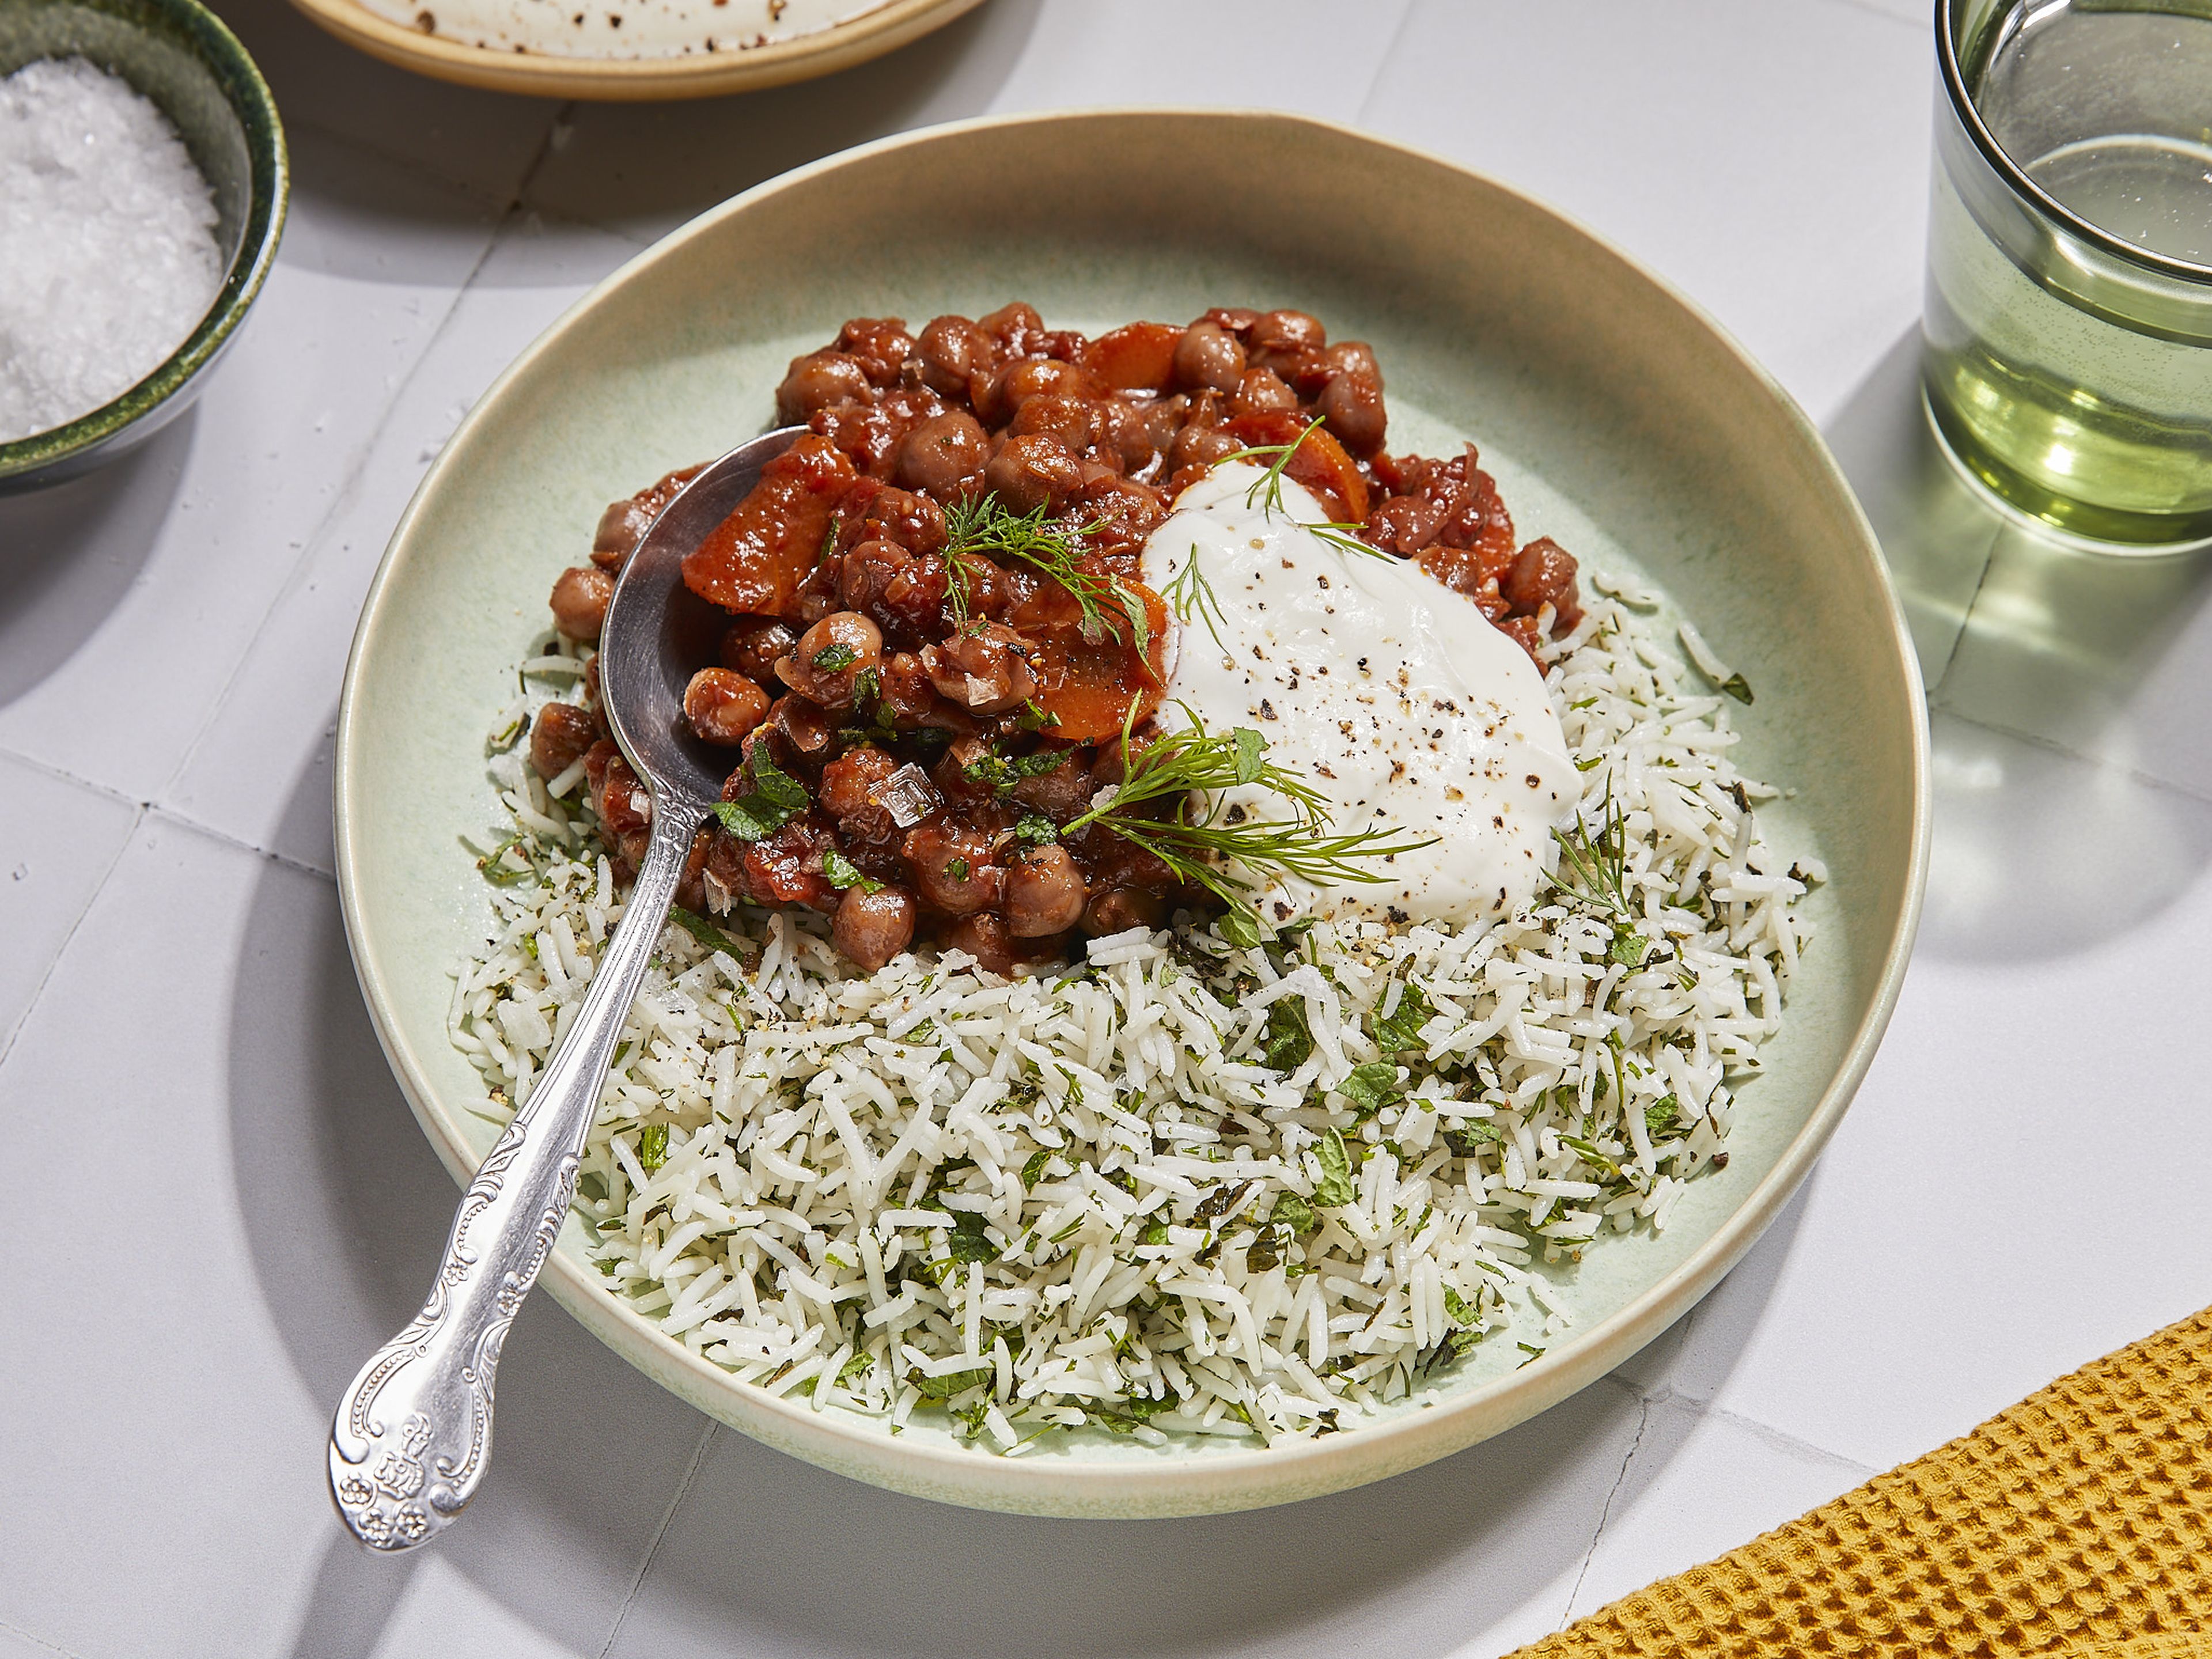 Braised chickpeas with herby rice